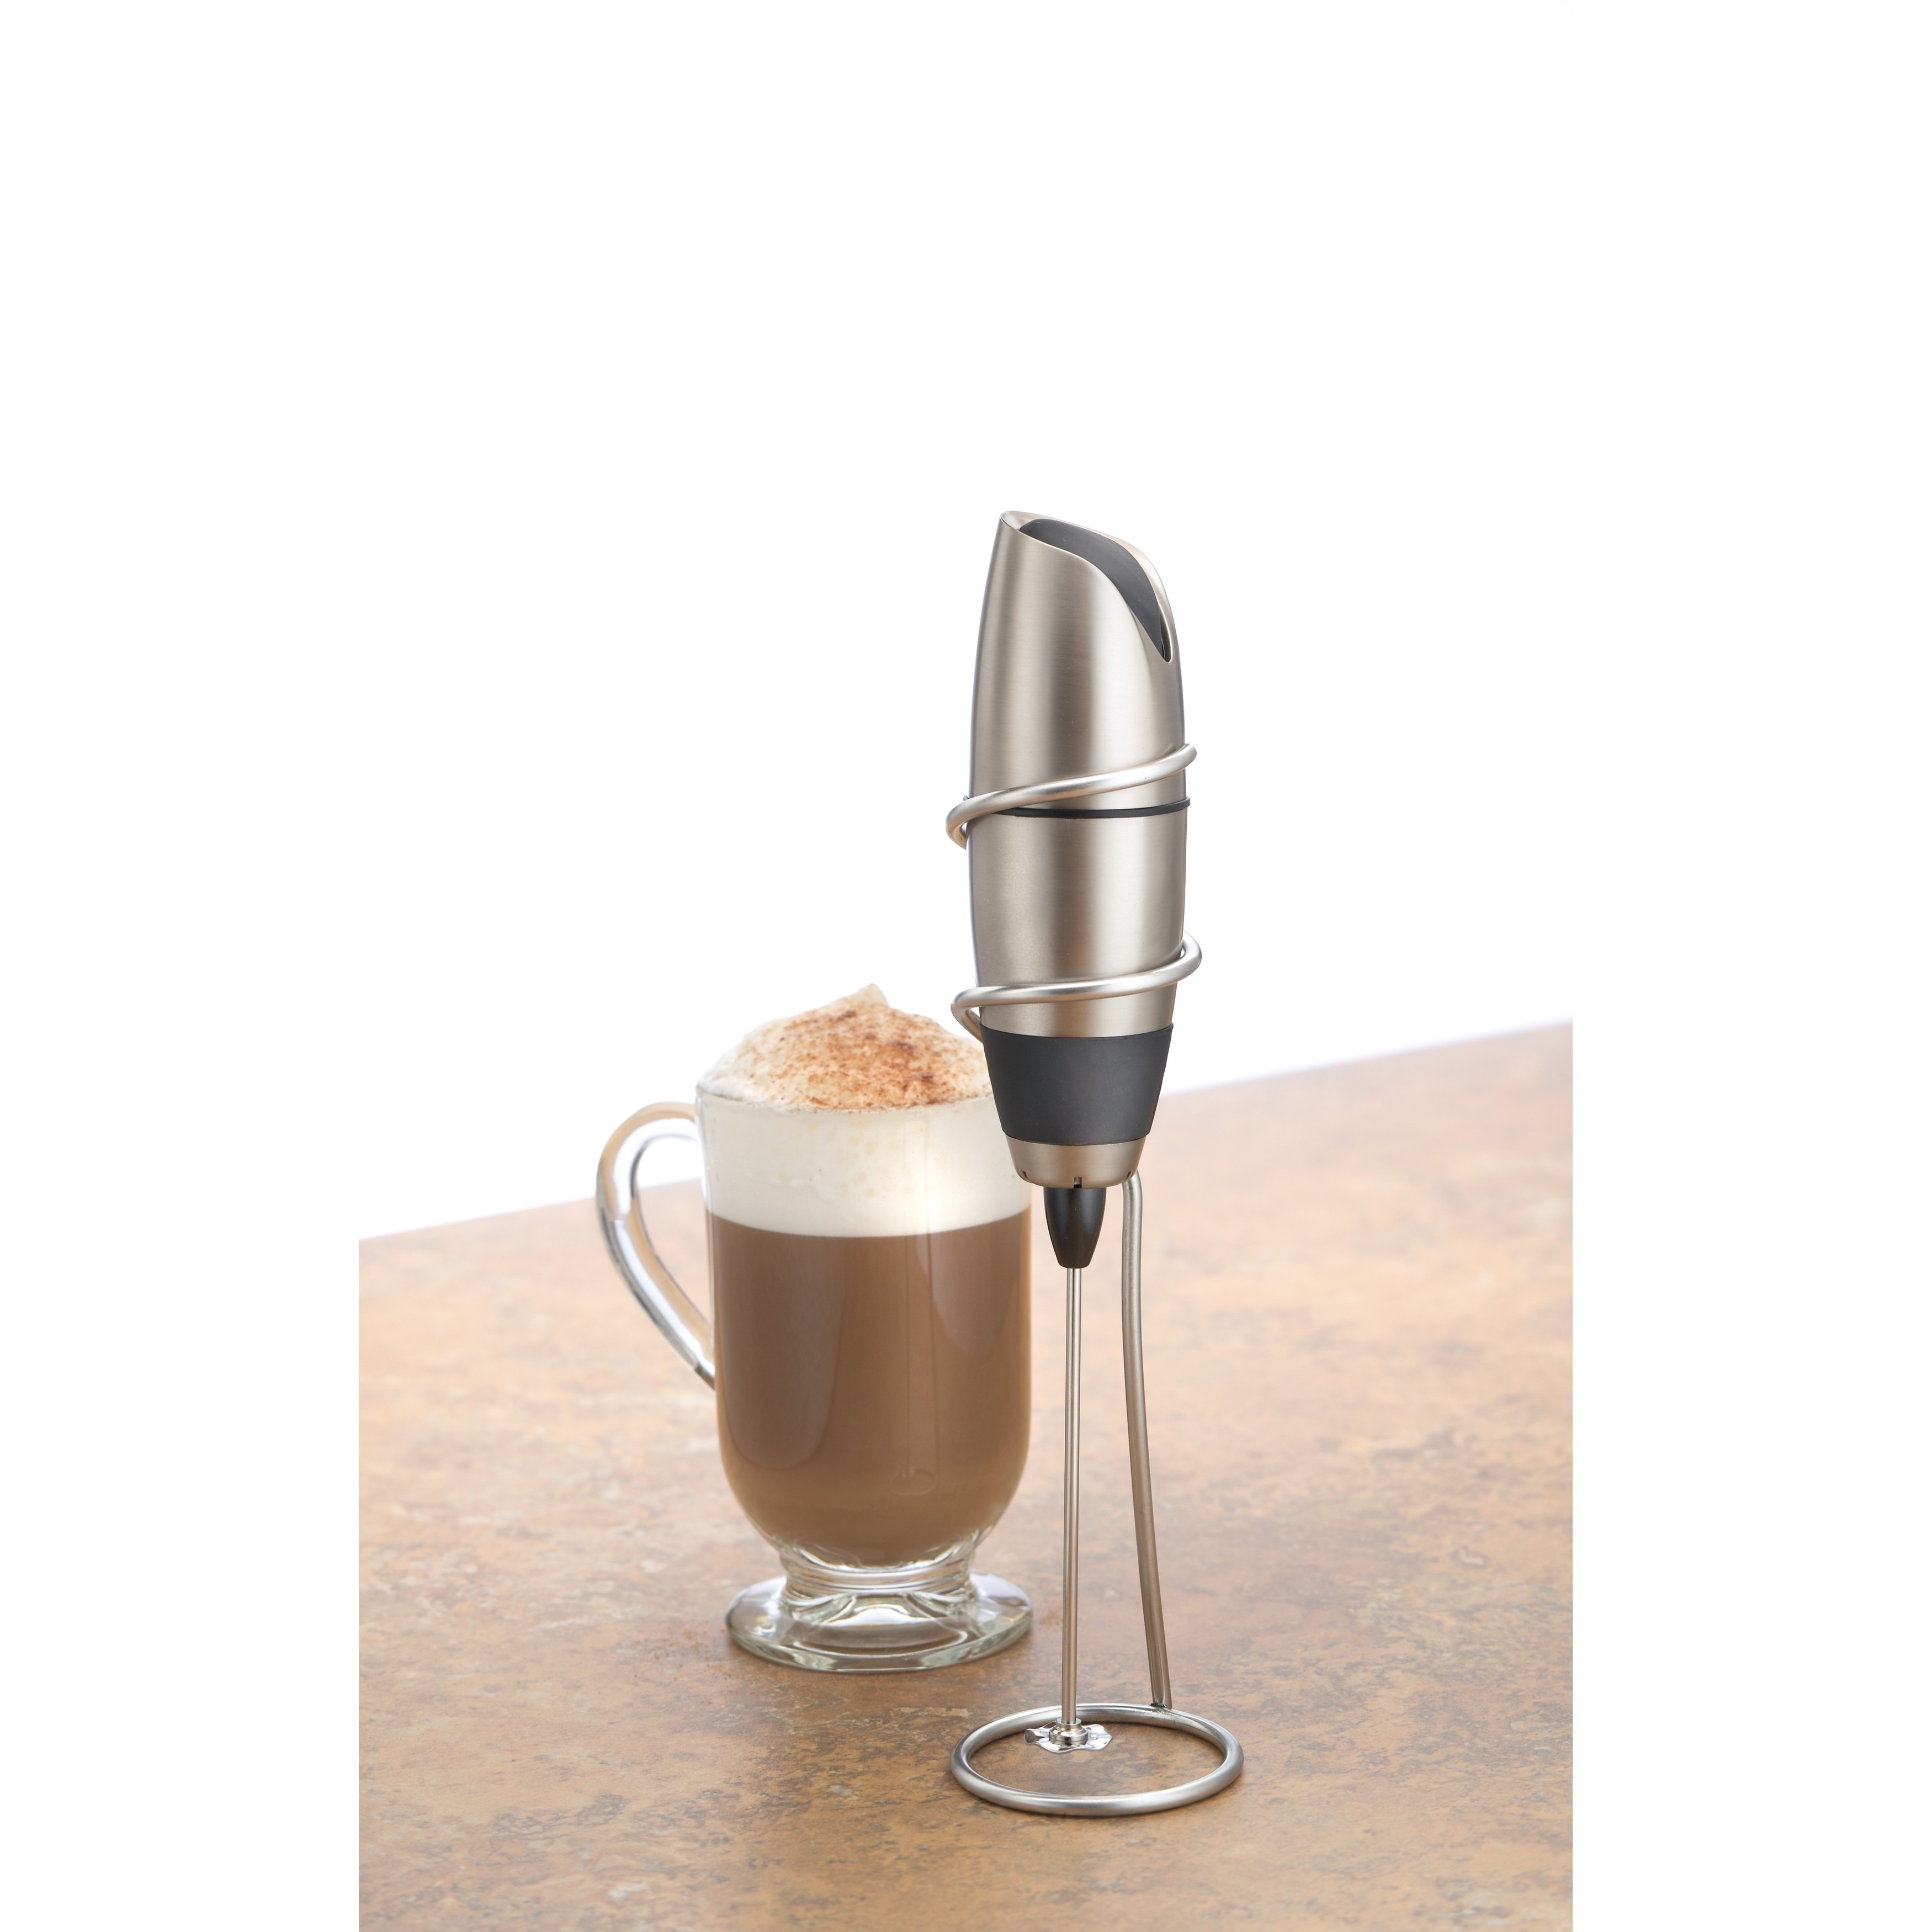  Bonjour Coffee Hand-Held Battery-Operated Mini